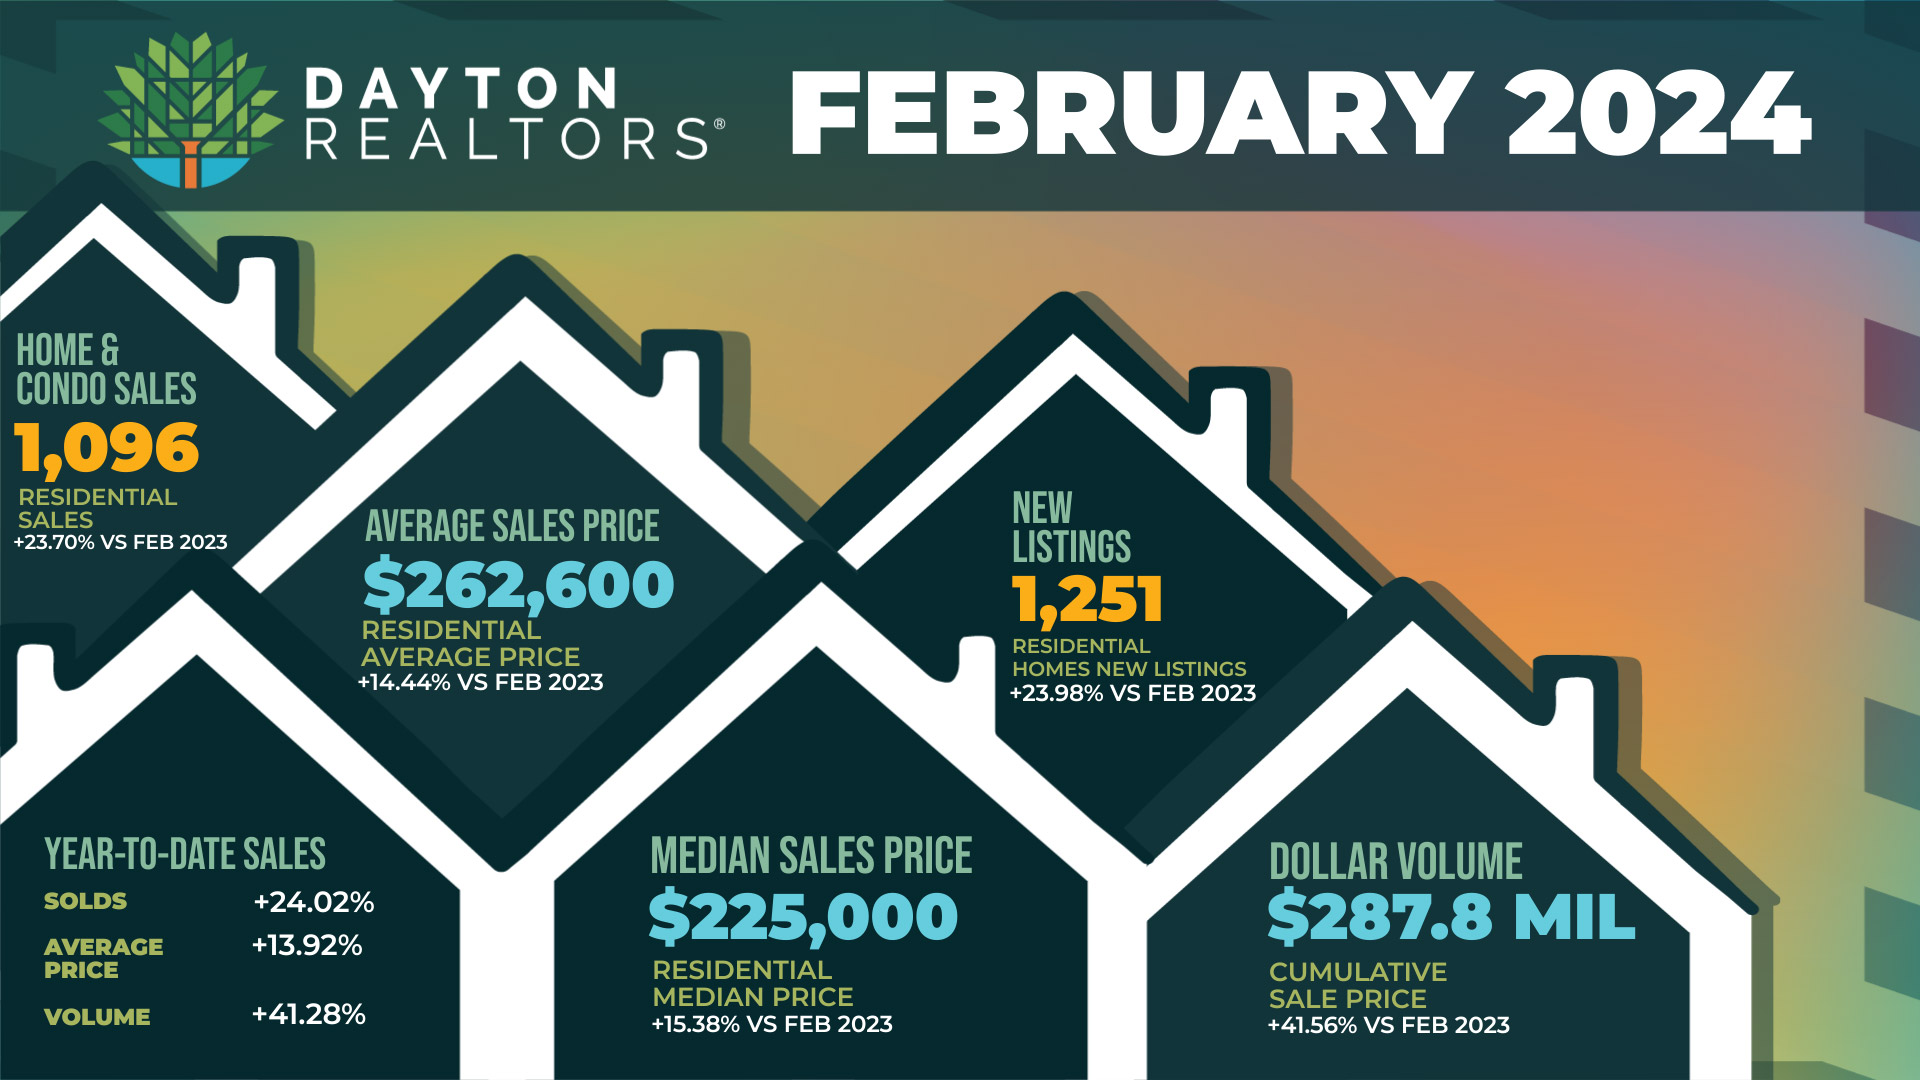 Dayton Area Home Sales for February 2024